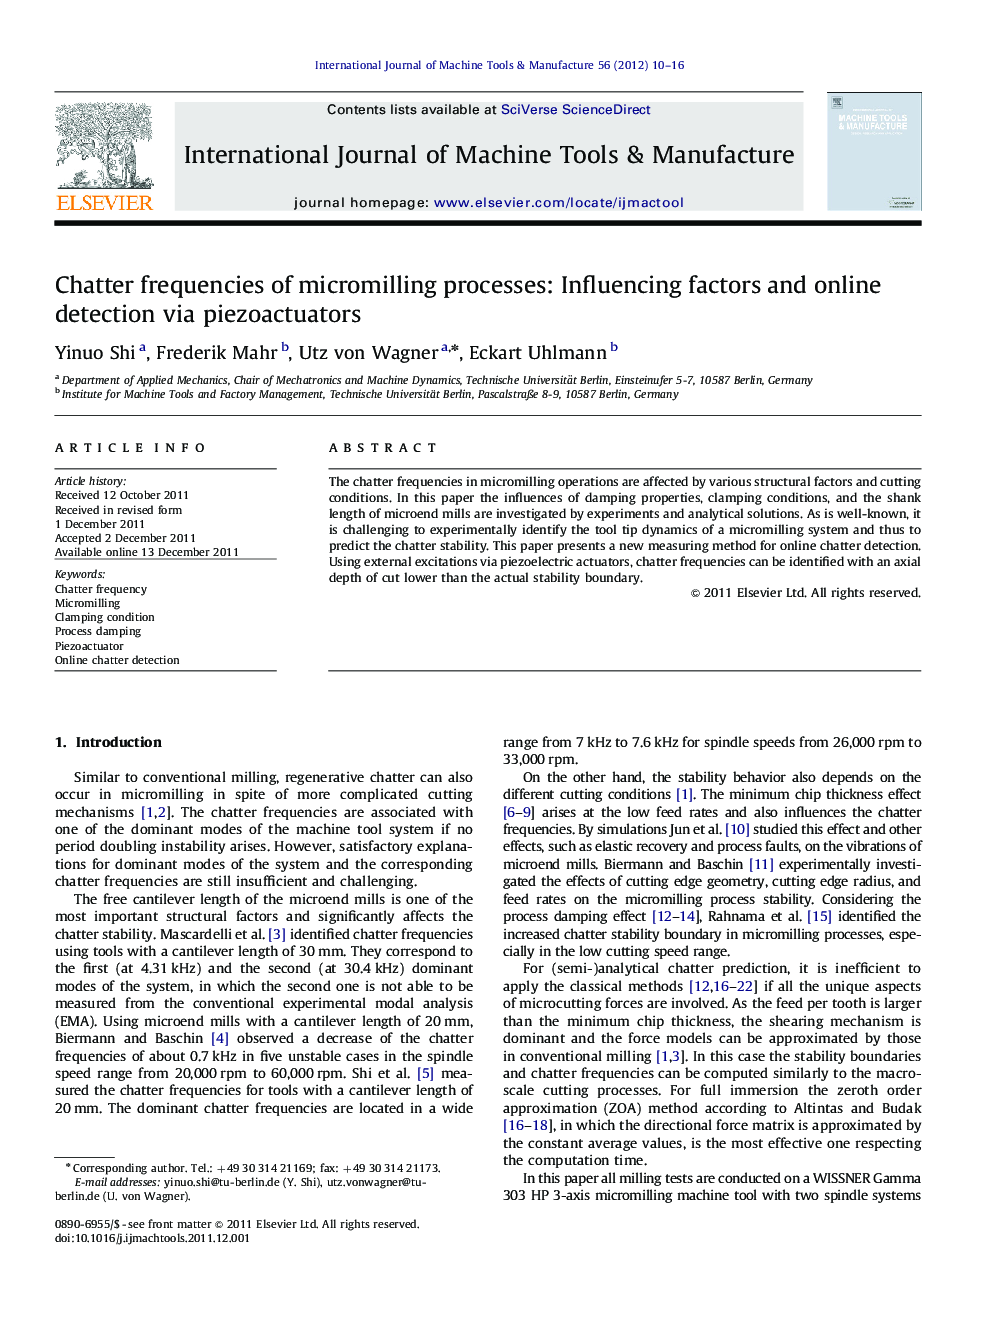 Chatter frequencies of micromilling processes: Influencing factors and online detection via piezoactuators